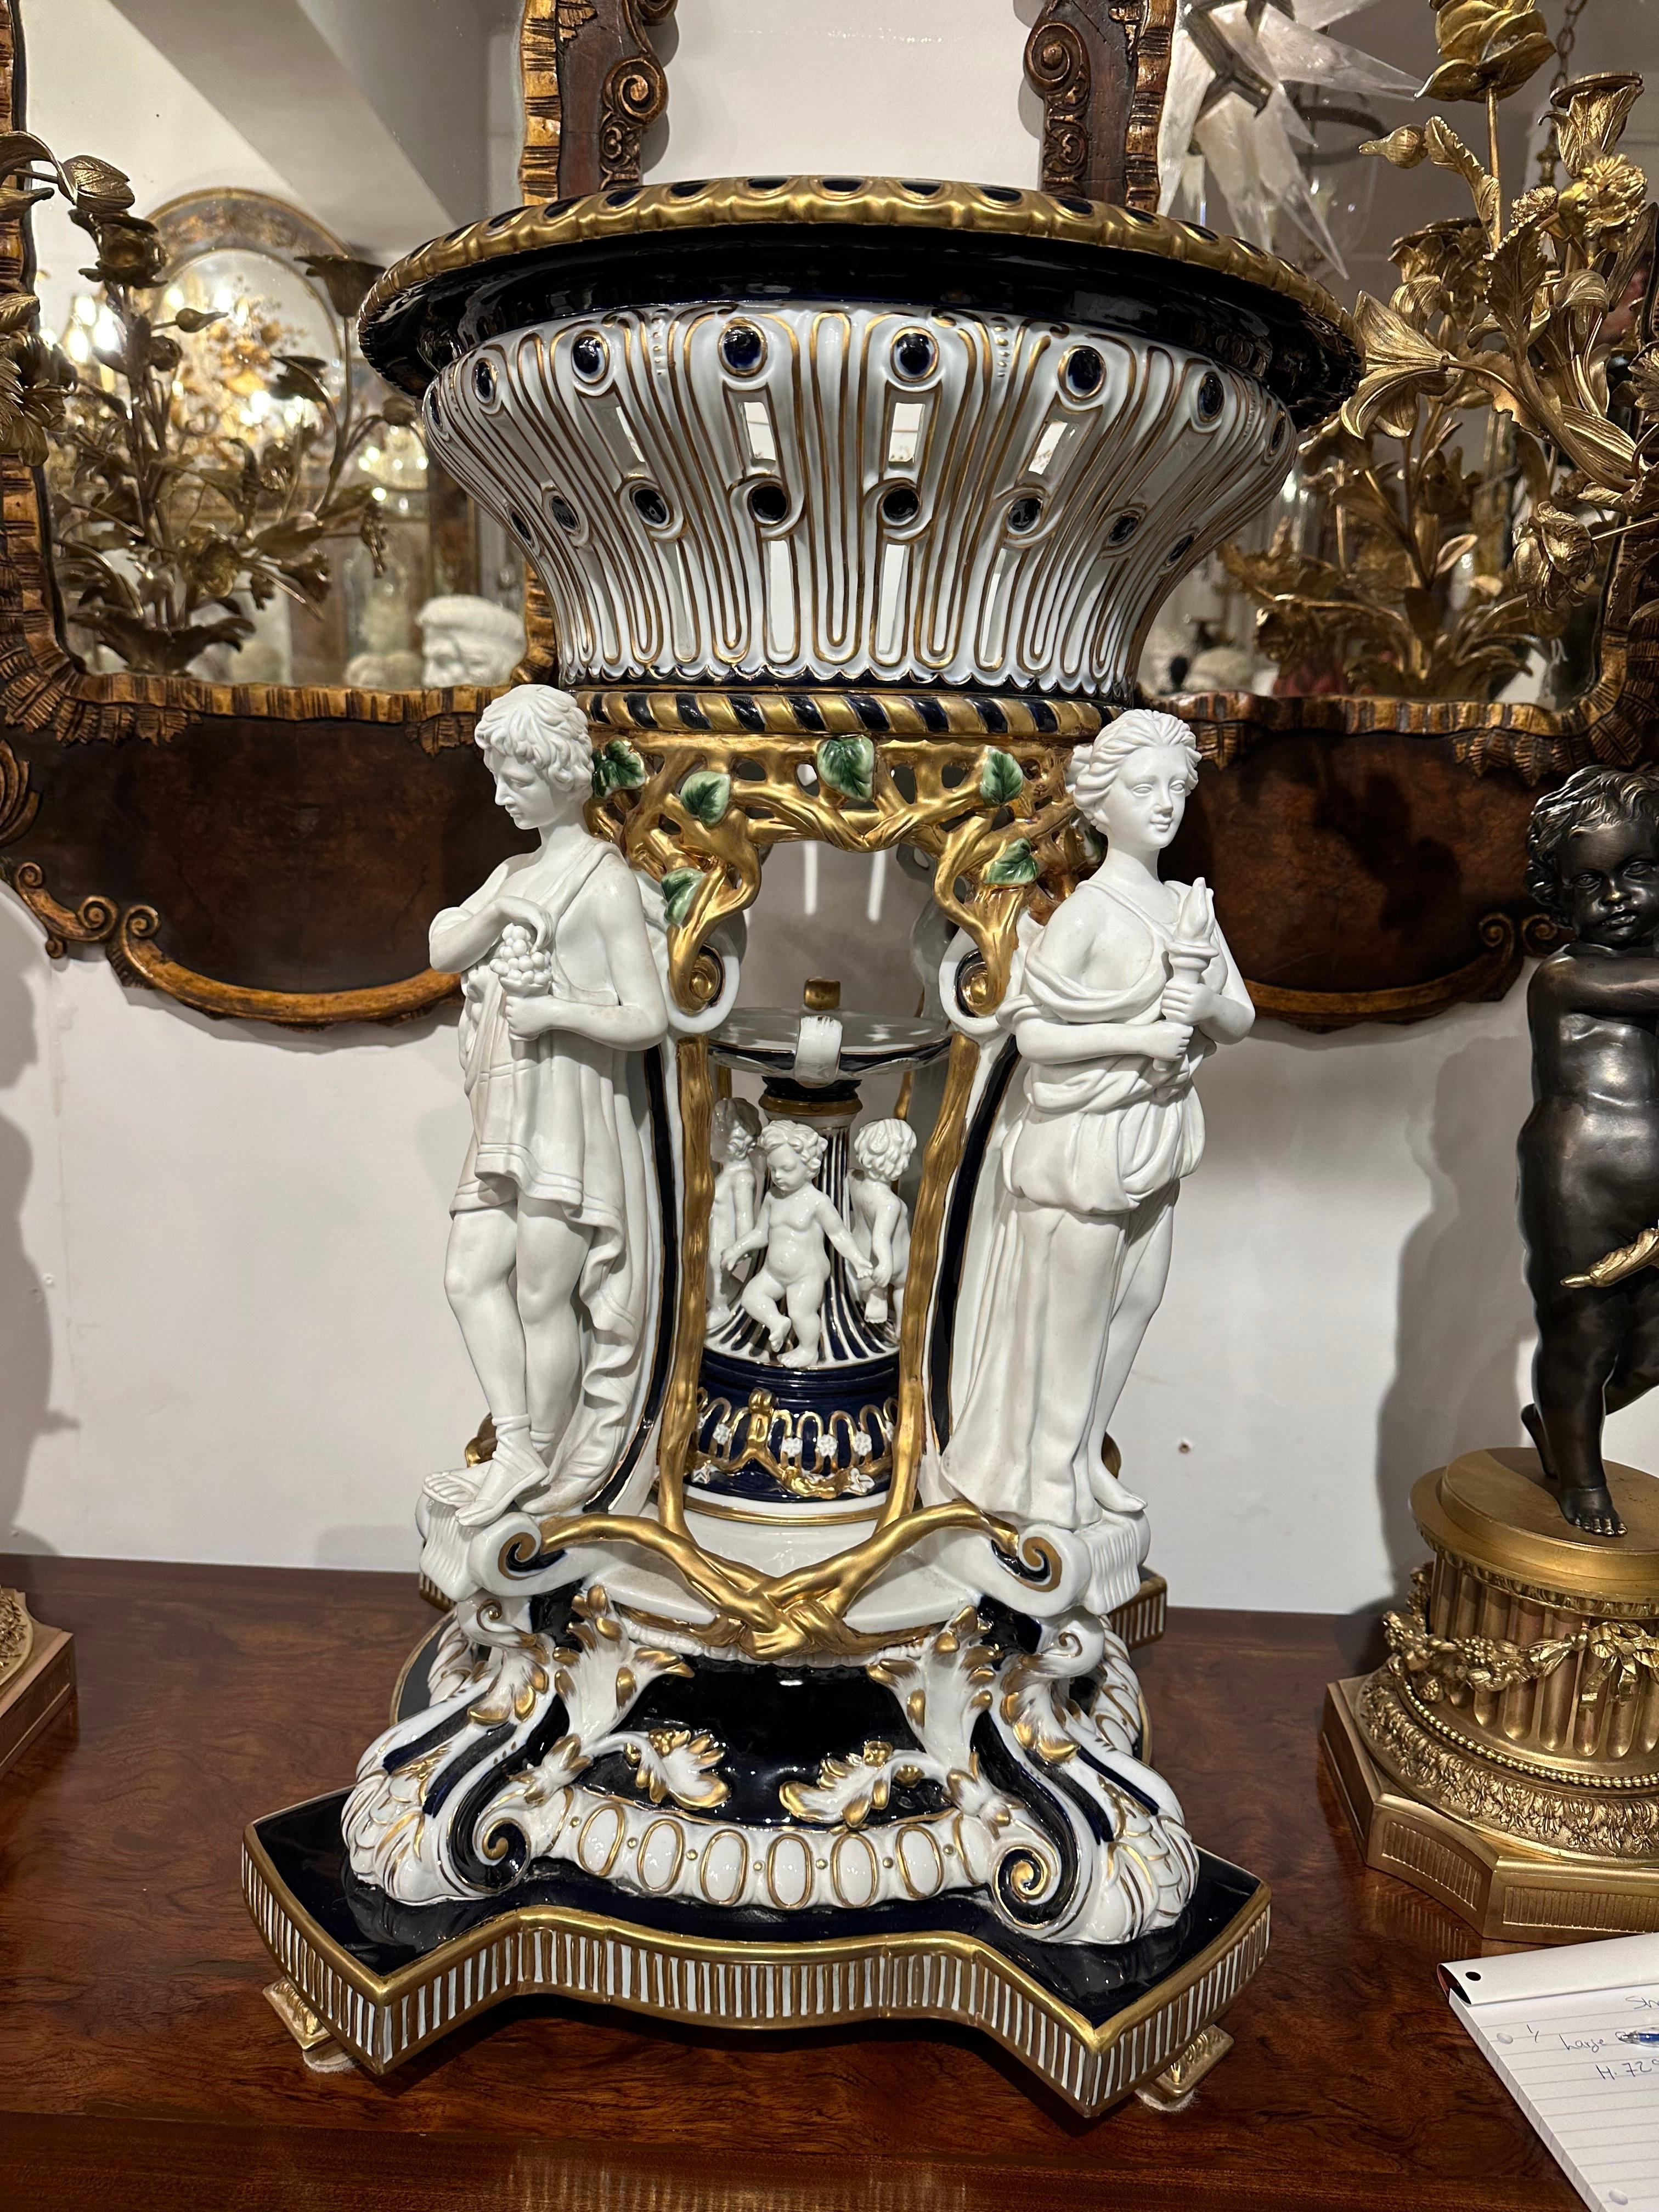 Charming large porcelain centrepiece of The four Seasons, with a pierced basket and delicate green foliage around the edge. Figures representing the Four Seasons stand on a rich deep blue, white and gold base encircling smaller cherurbs. The figures